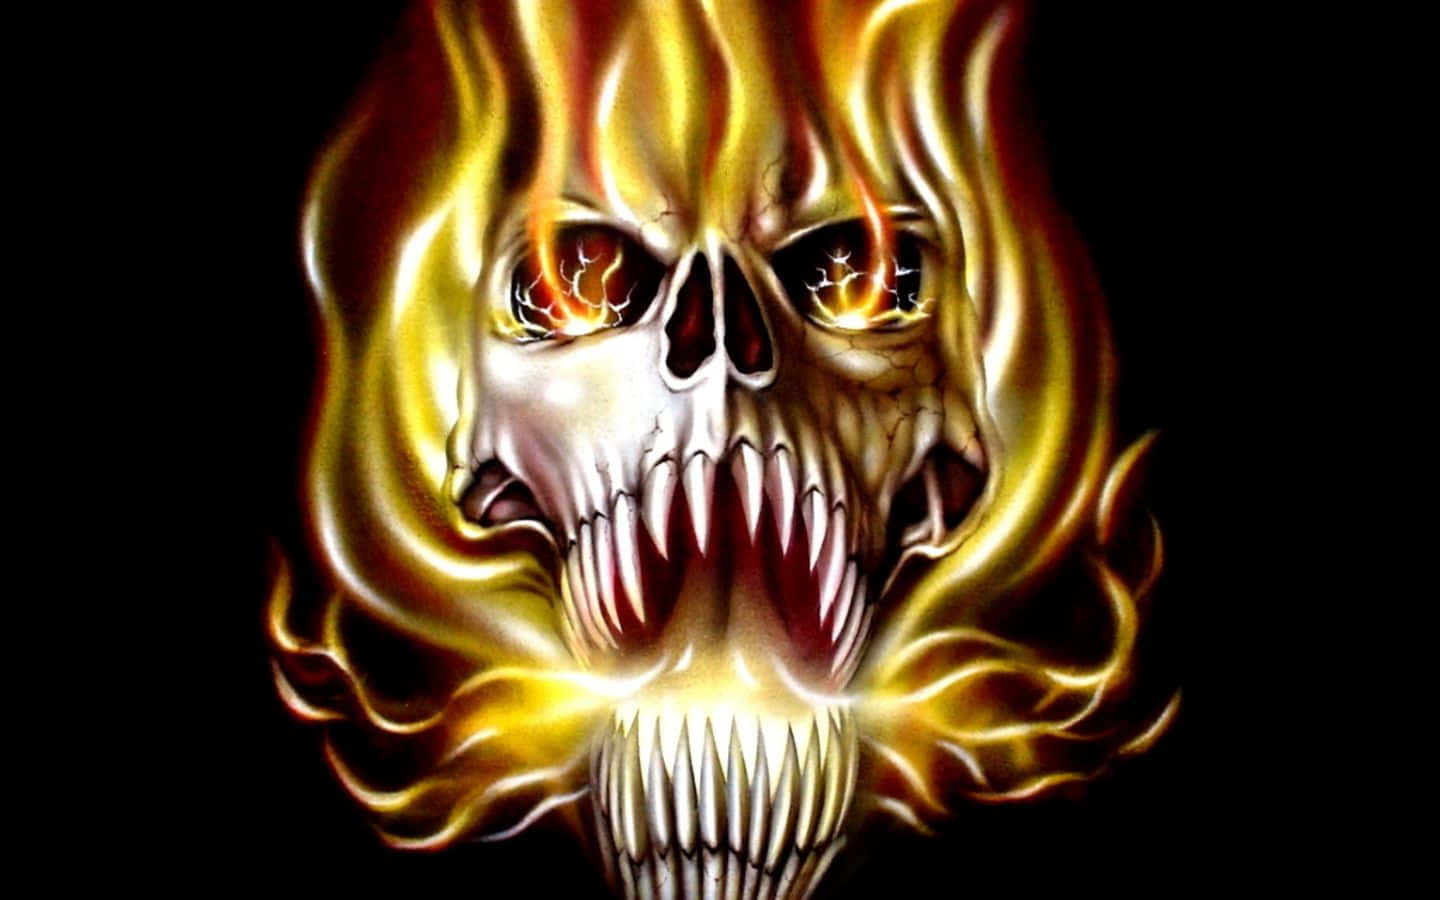 A Skull With Flames On It Wallpaper